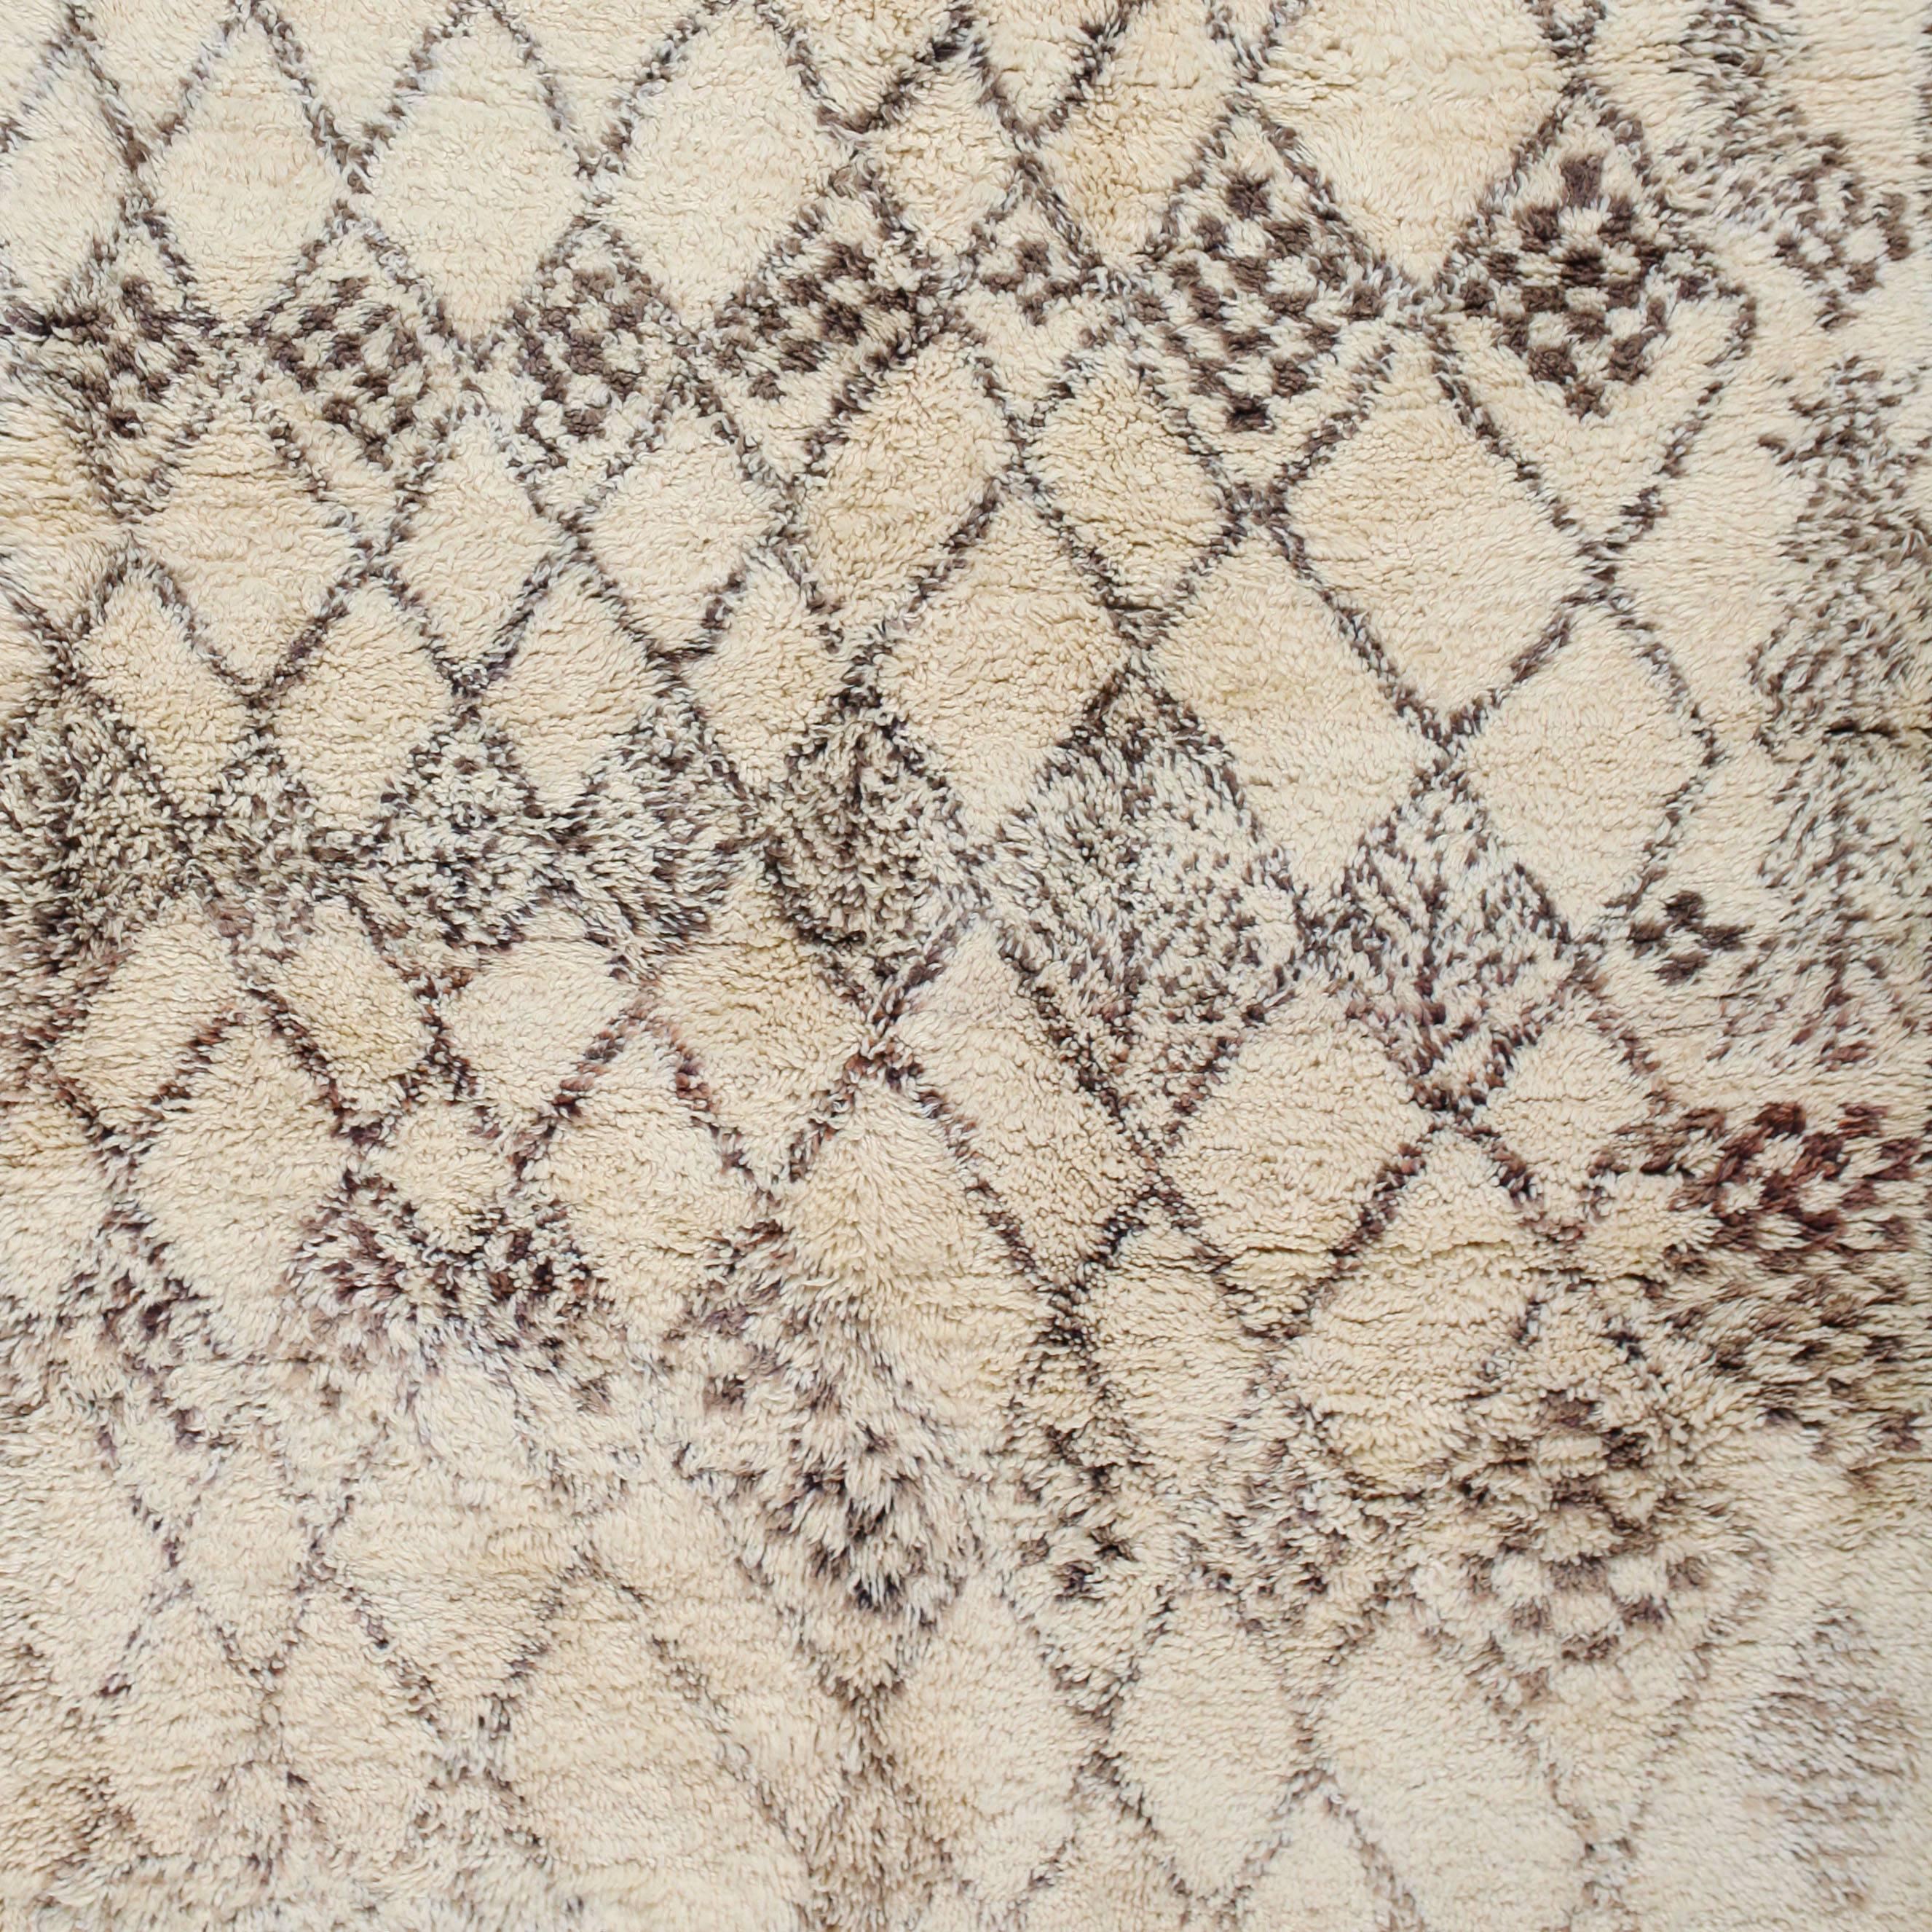 Welcome to the metaphysical world of Beni Ouarain weavers.
This authentic Berber carpet with a biomorphic pattern is hand-knotted with a soft blend of subtle browns on a field of natural golden-white wool. The Beni Ouarain tribe produces some of the